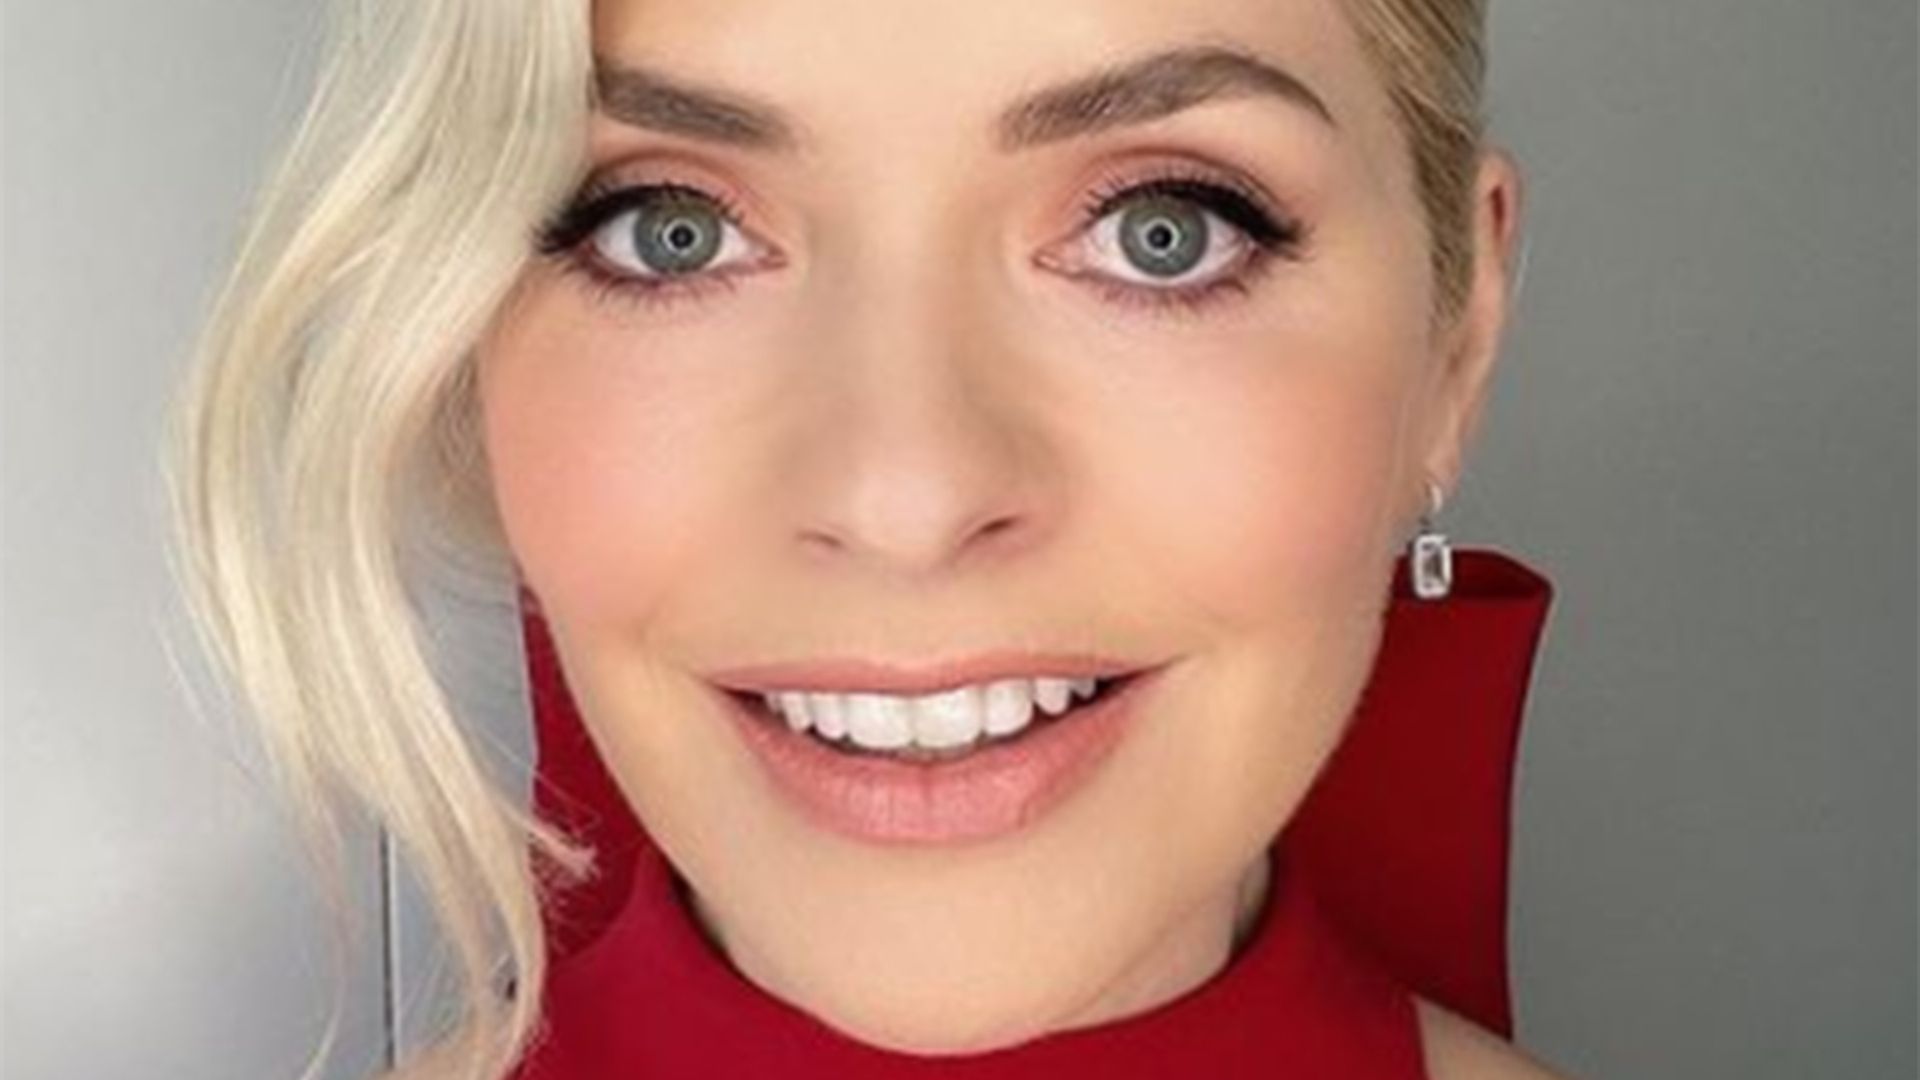 holly willoughby red dress